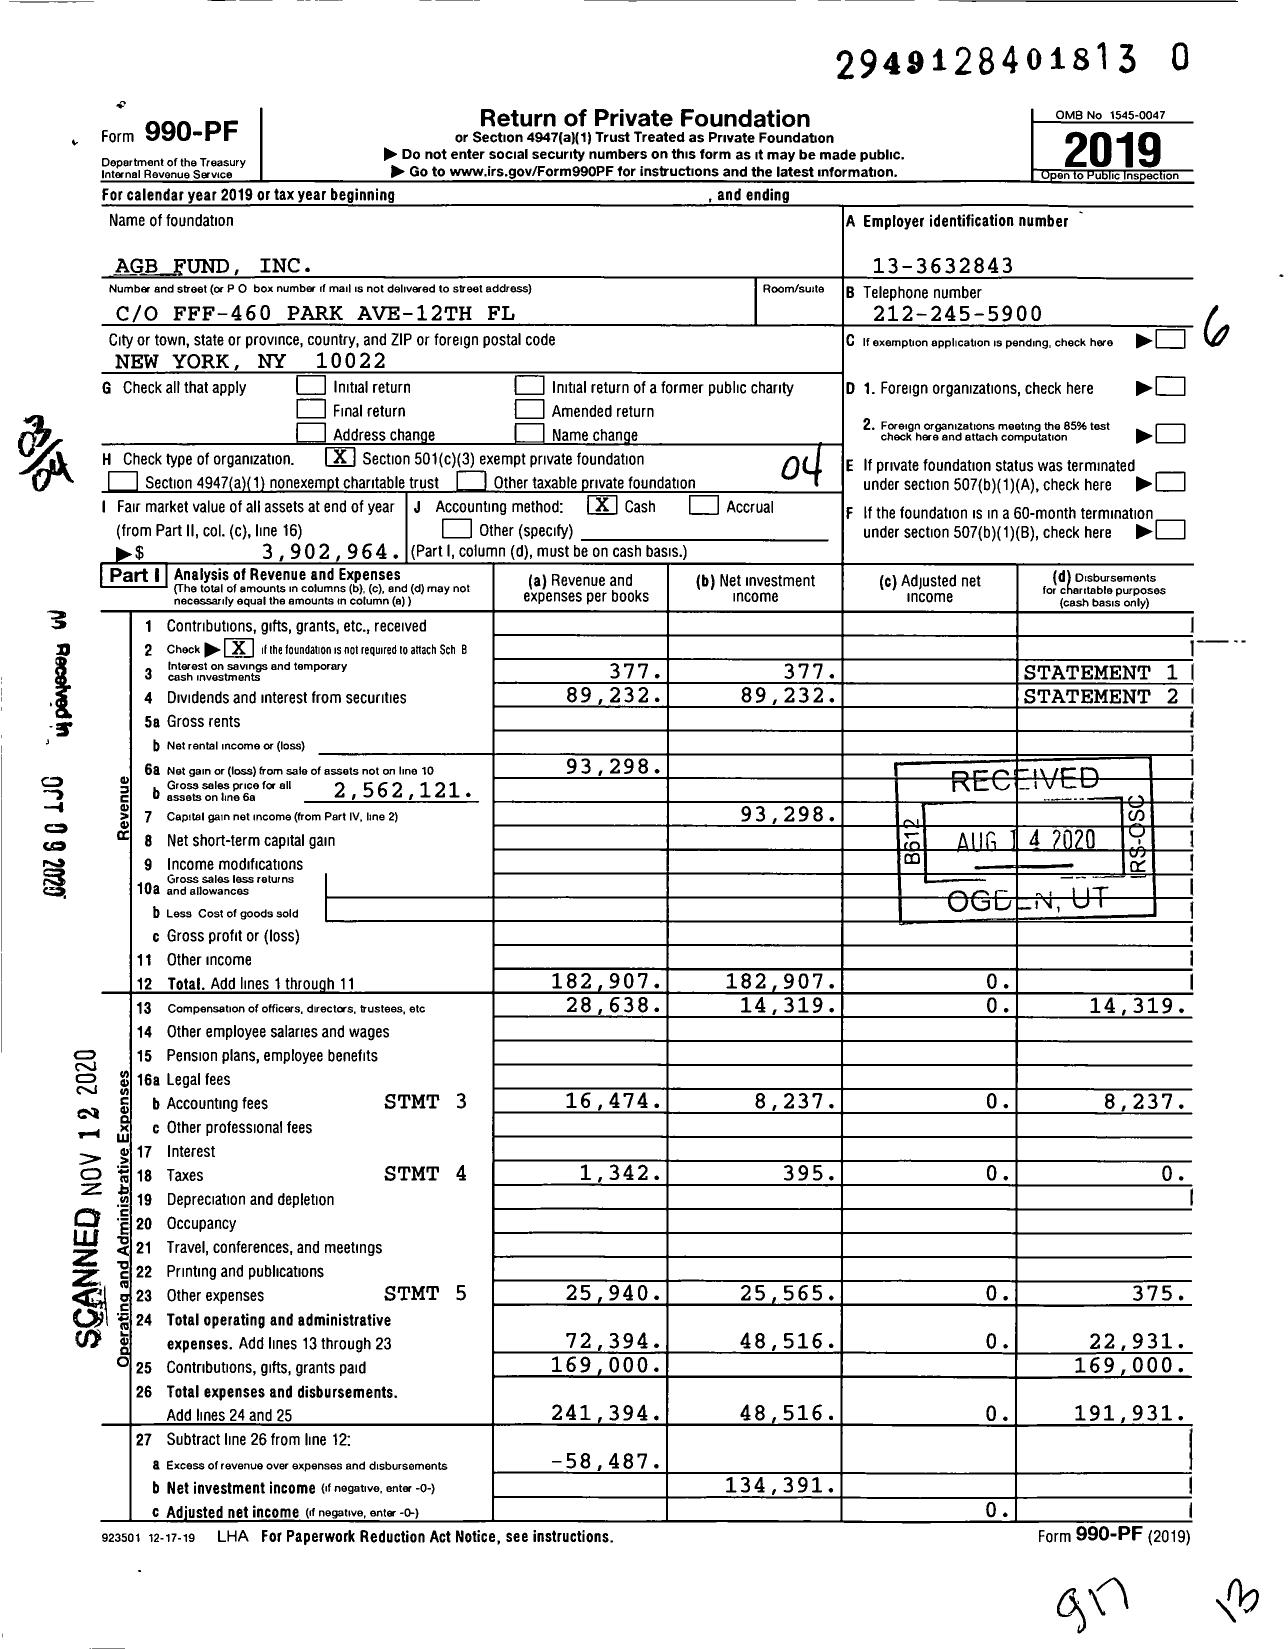 Image of first page of 2019 Form 990PF for Agb Fund